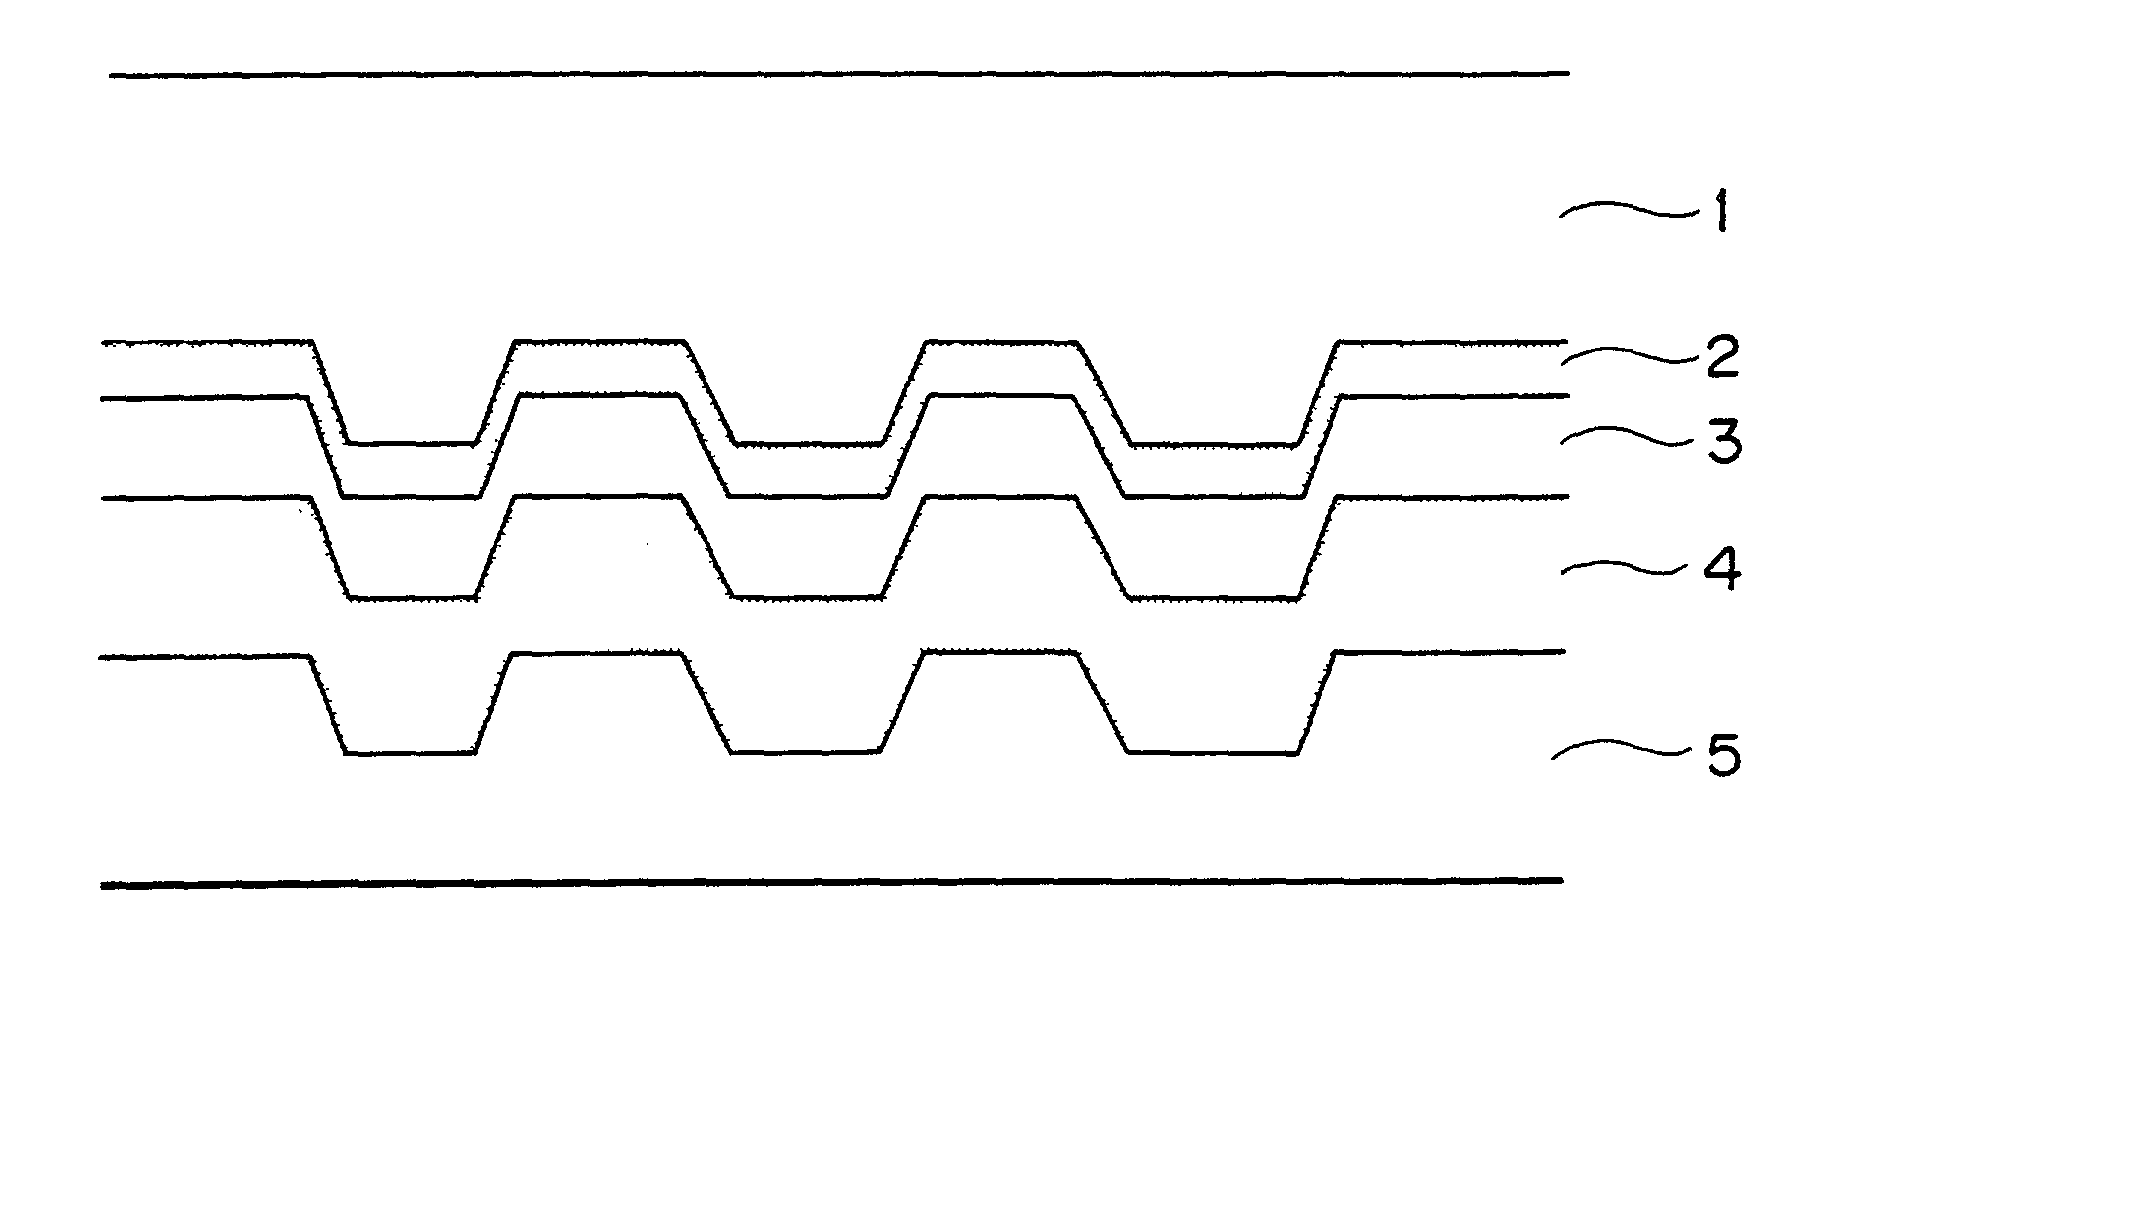 Reflection layer or semi-transparent reflection layer for use in optical information recording media, optical information recording media and sputtering target for use in the optical information recording media